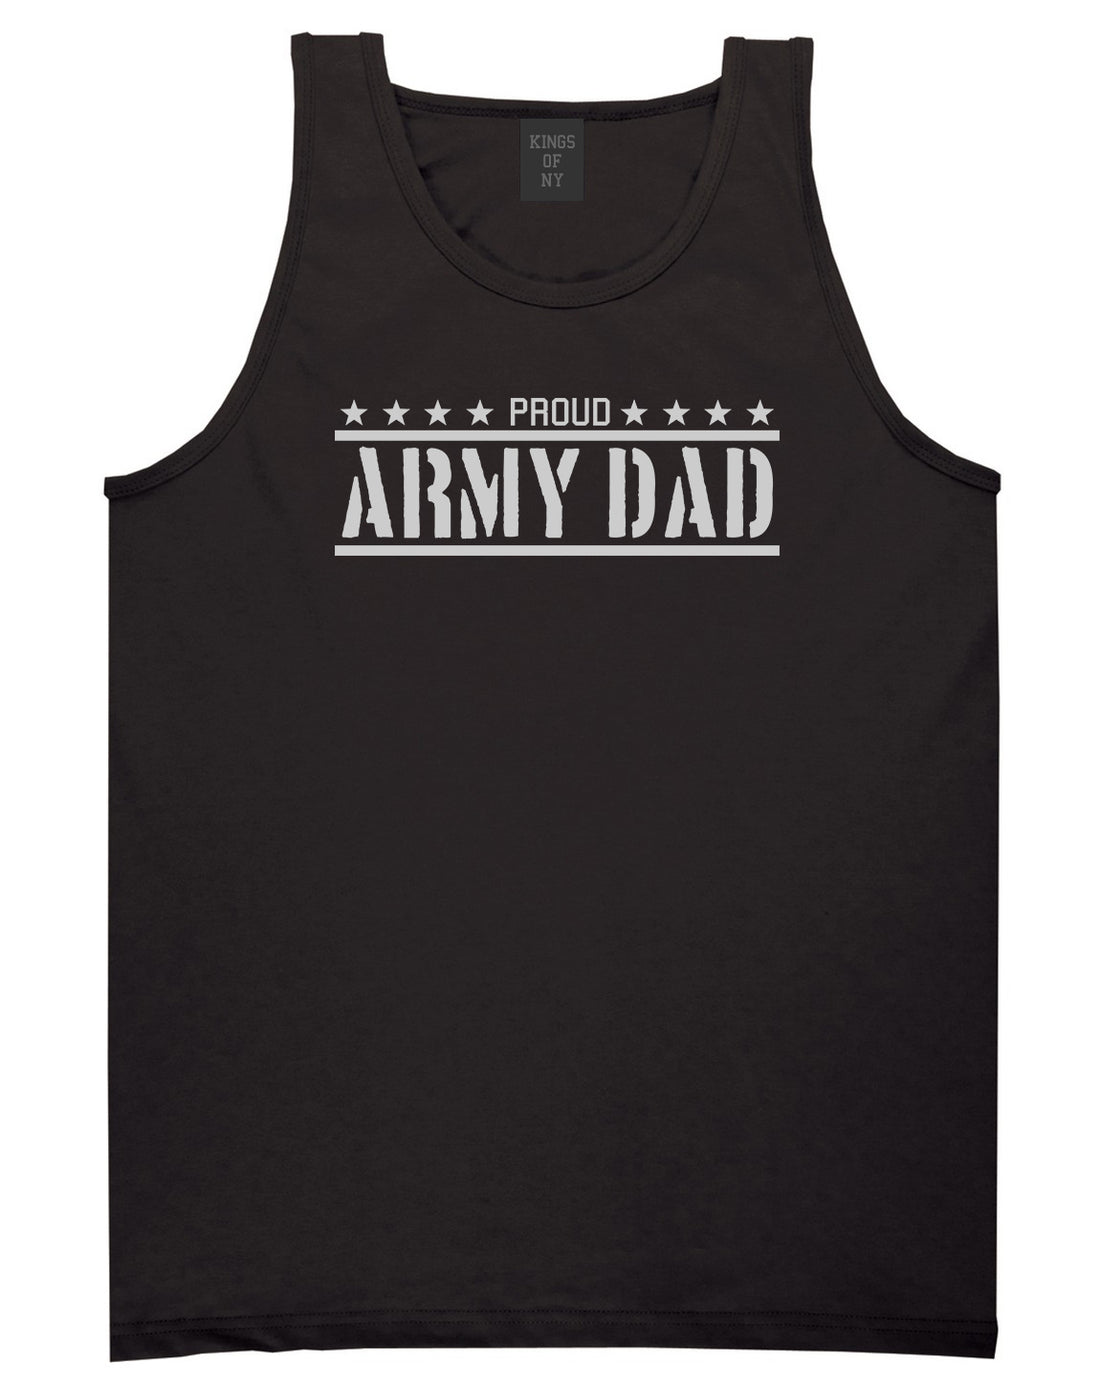 Proud Army Dad Military Mens Tank Top Shirt Black by Kings Of NY